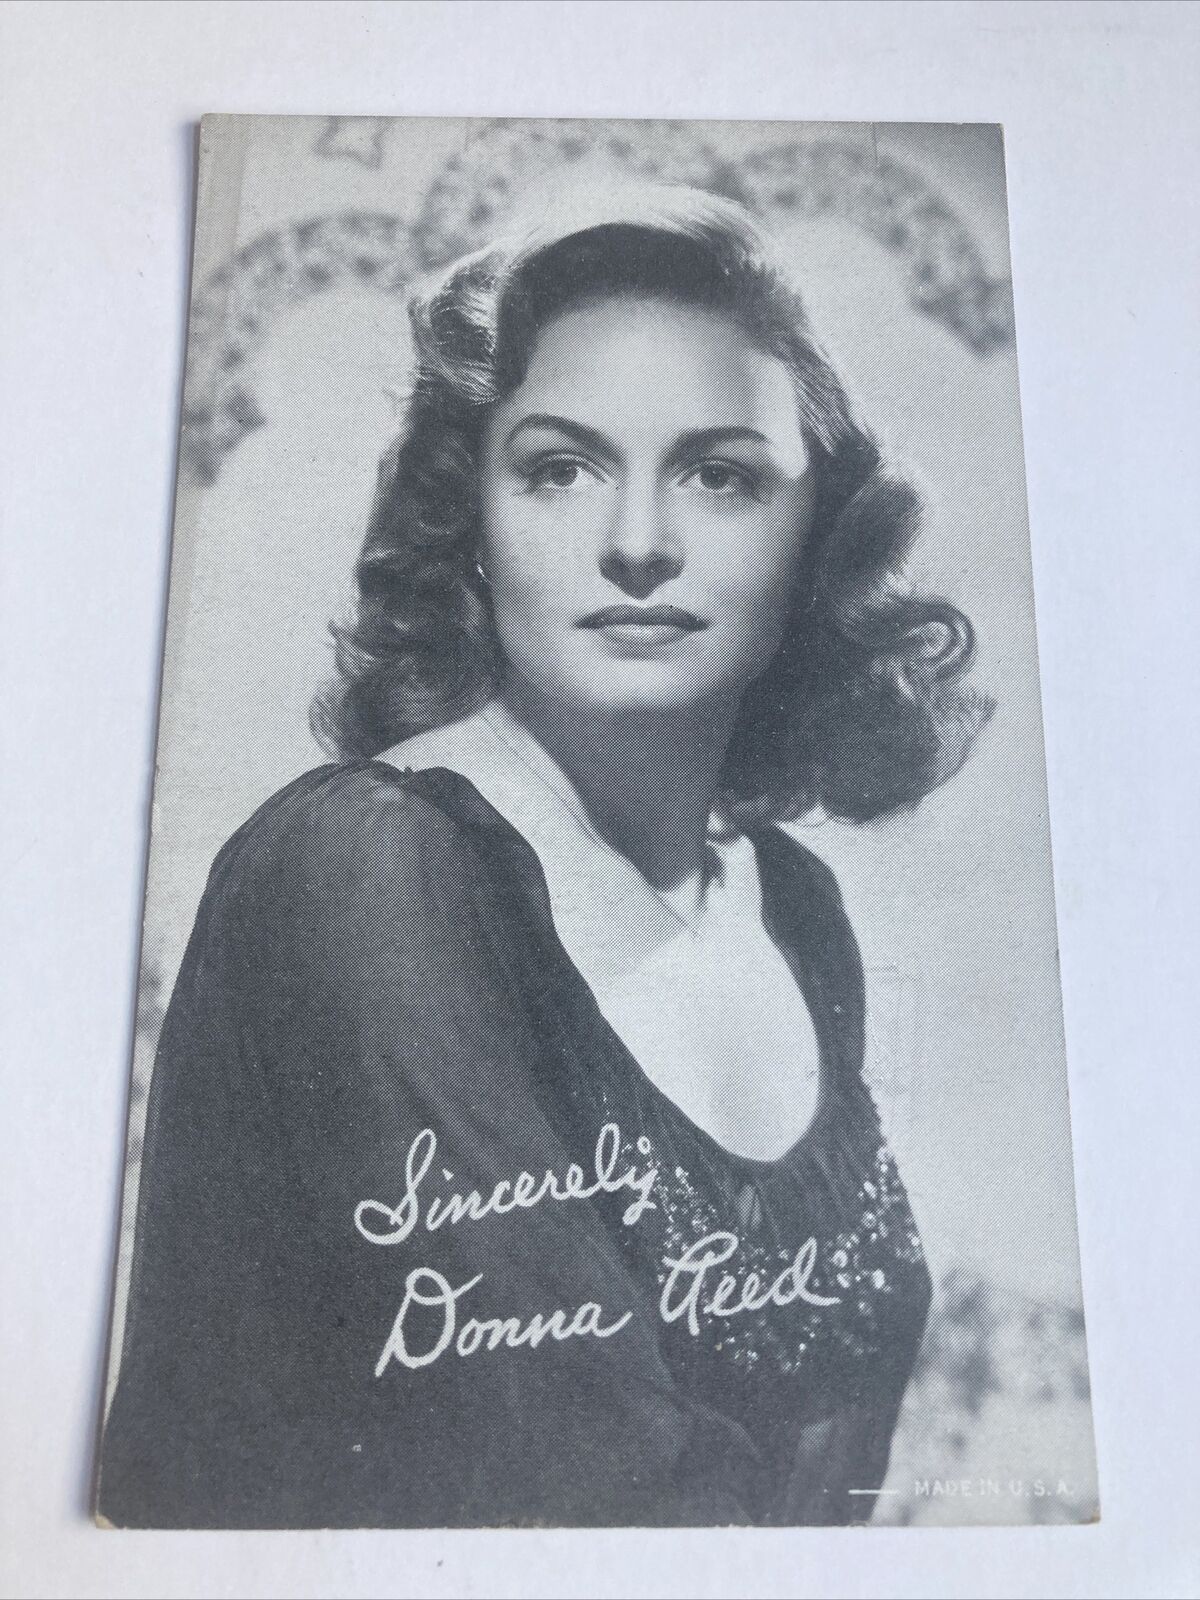 DONNA REED vintage Mutoscope pinup exhibit arcade card